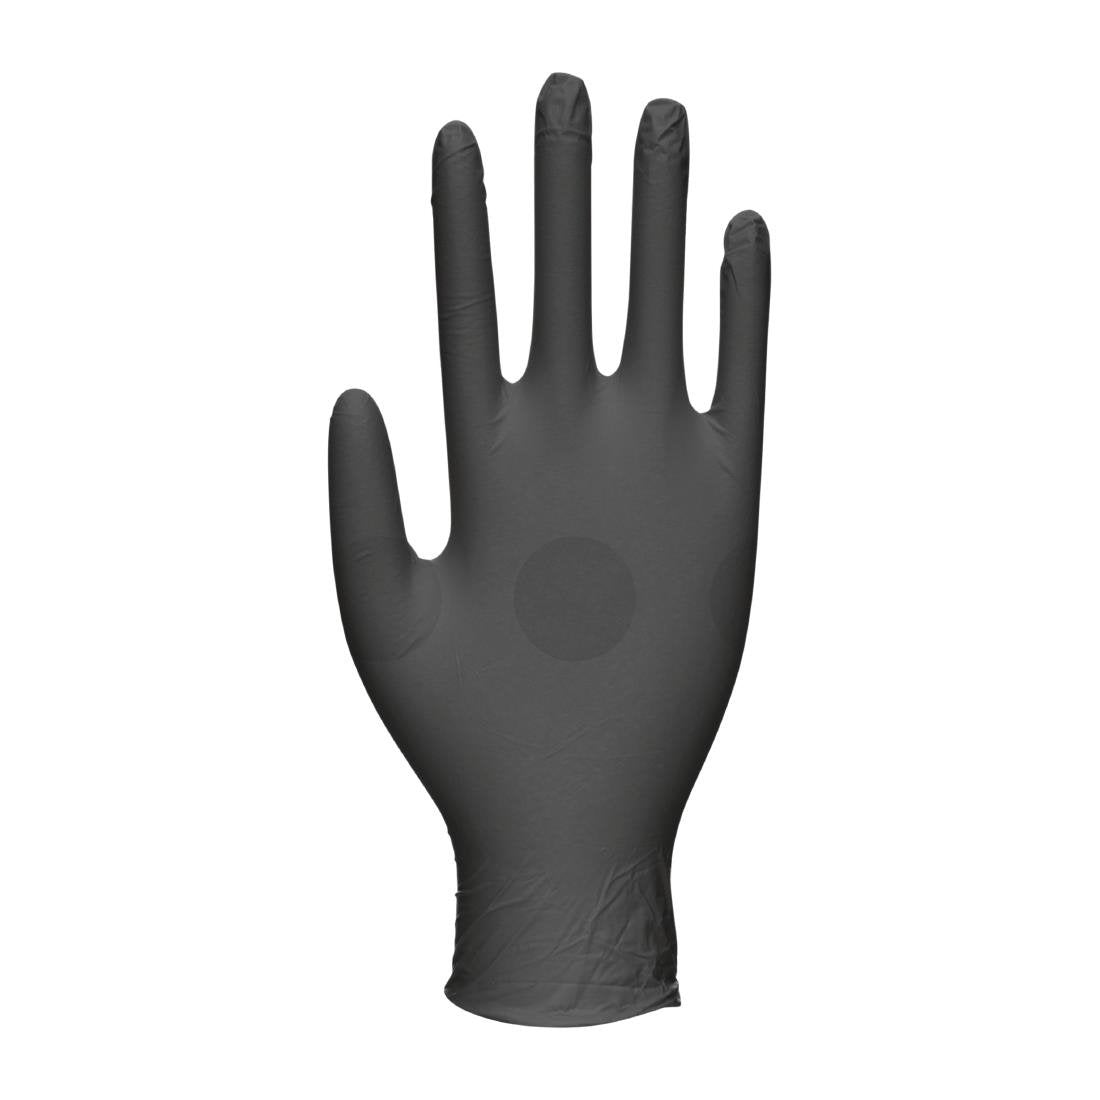 FW845-S Biotouch Single Use Glove Black Nitrile Powder Free Size Ssmall (Pack of 100)